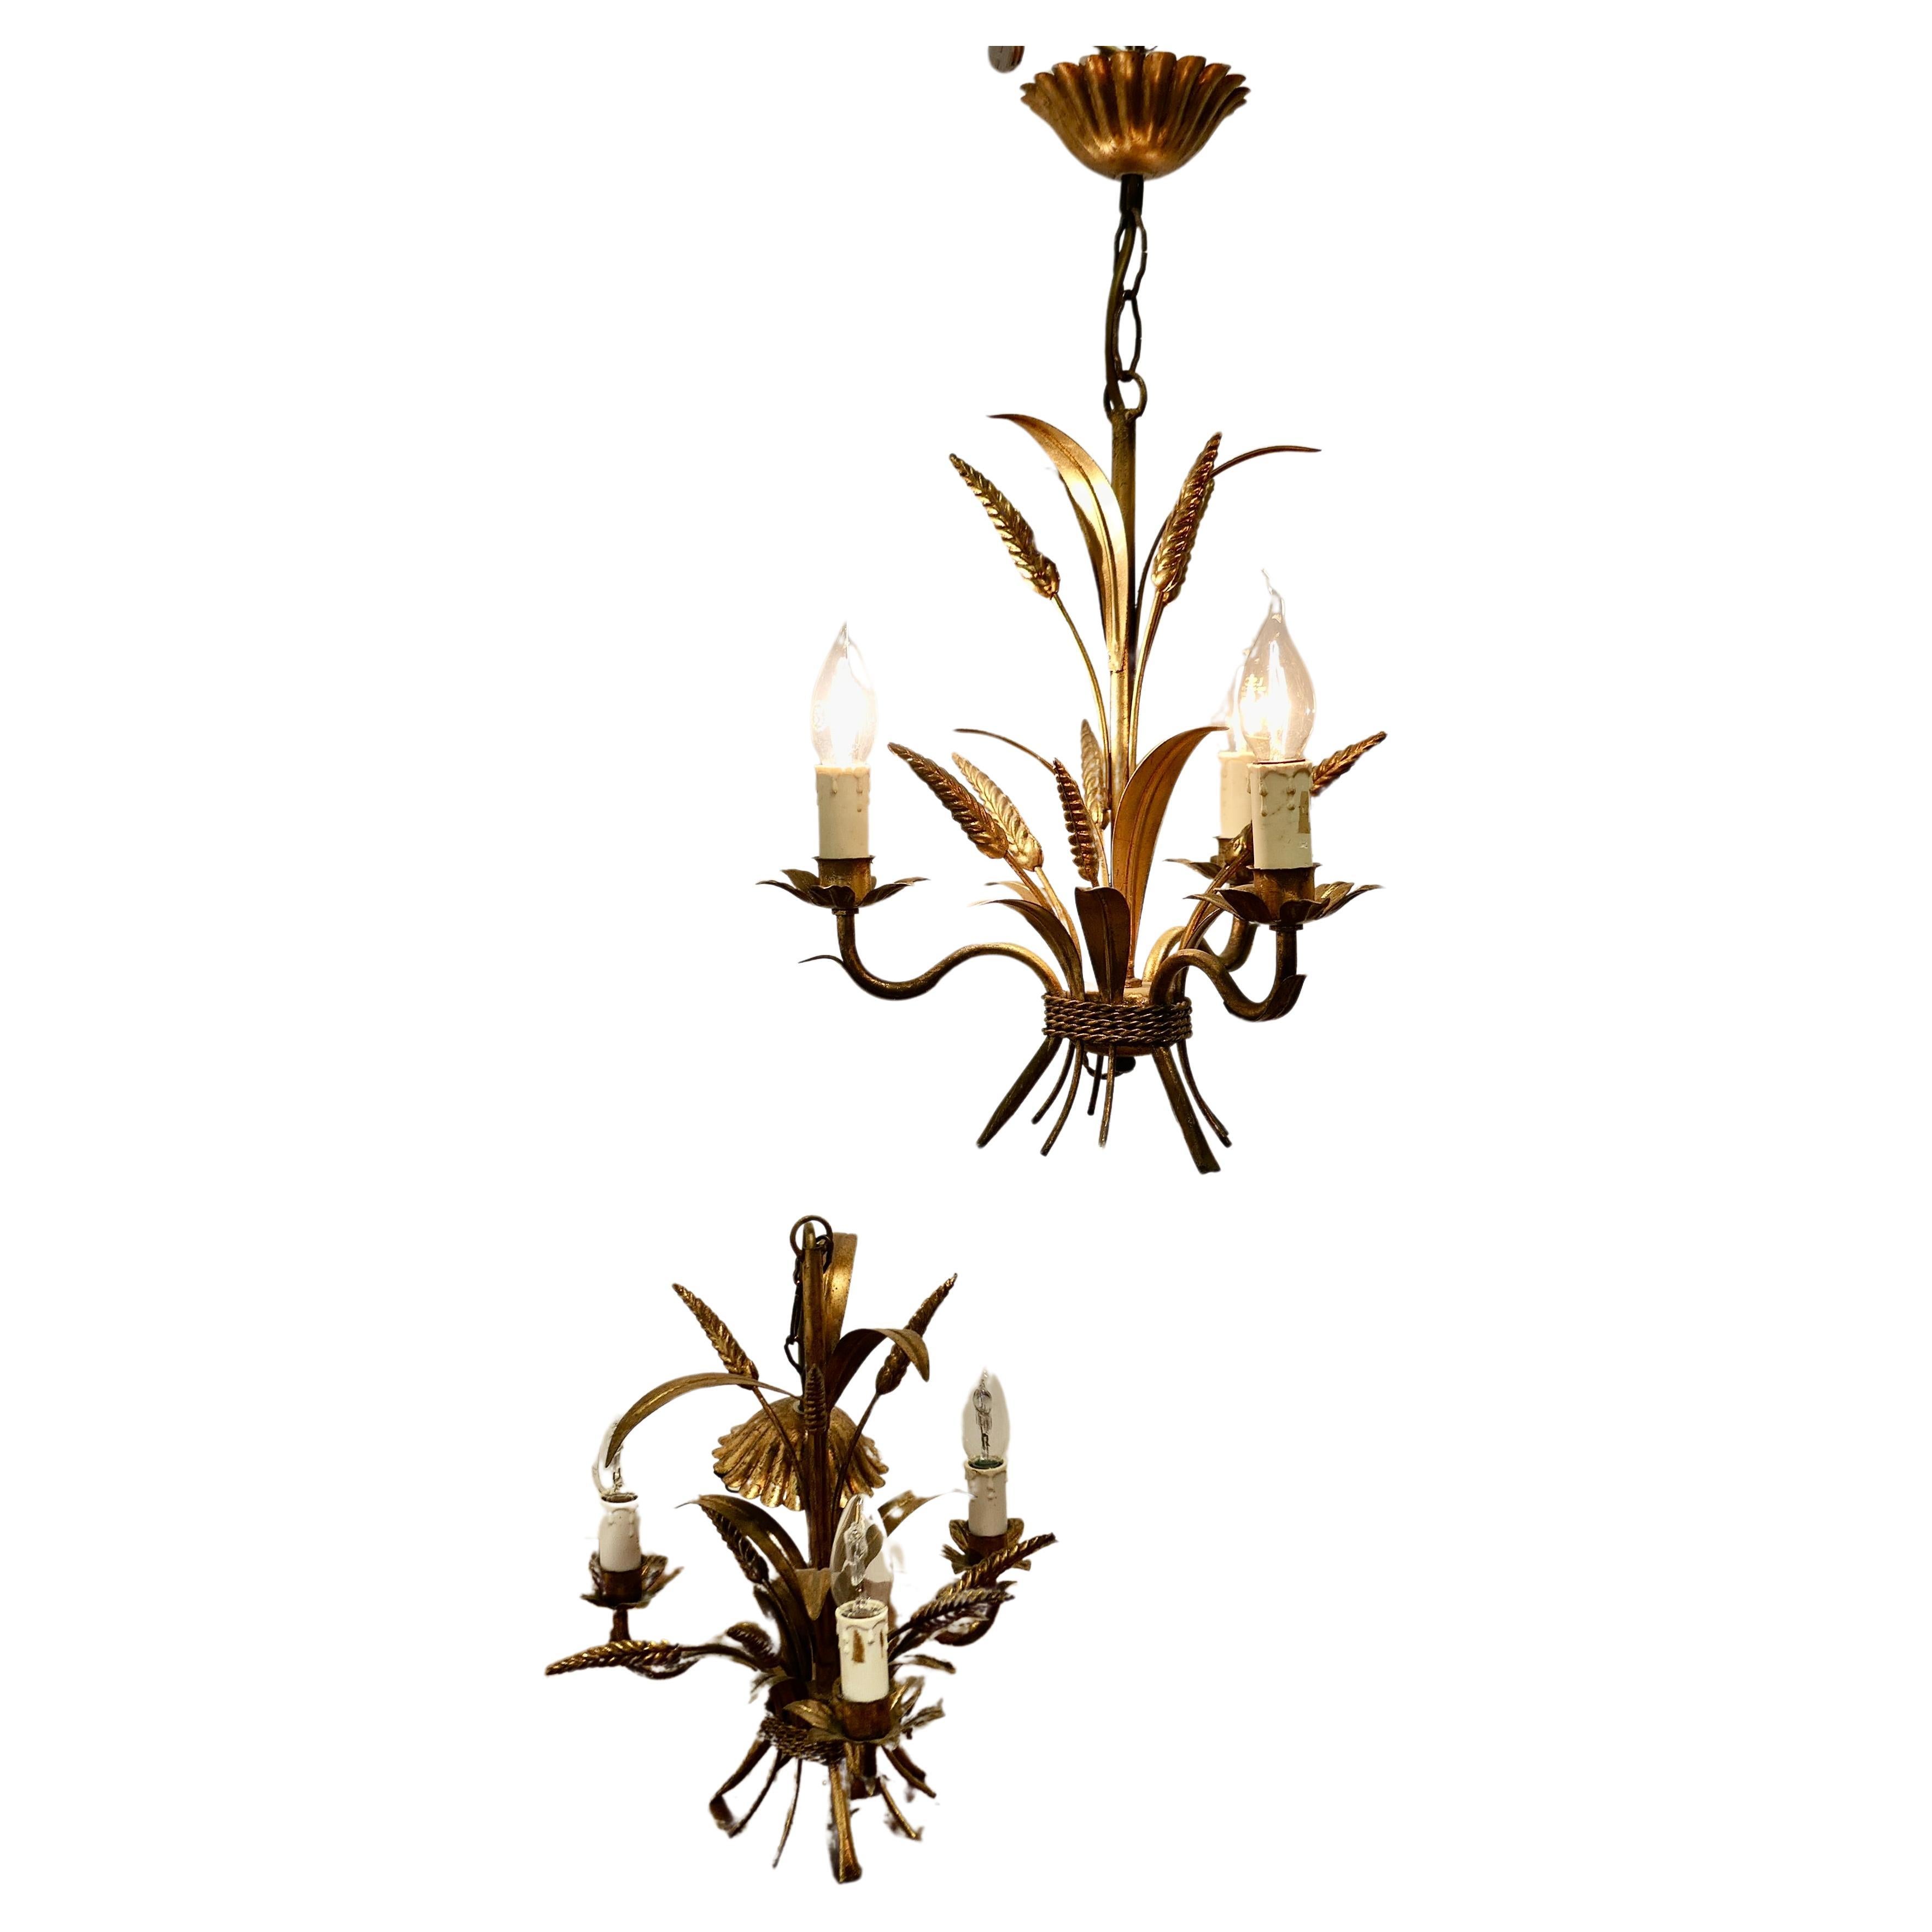 A Pair of Matching French Toleware Gilded Pendant Lights  These are very pretty  For Sale